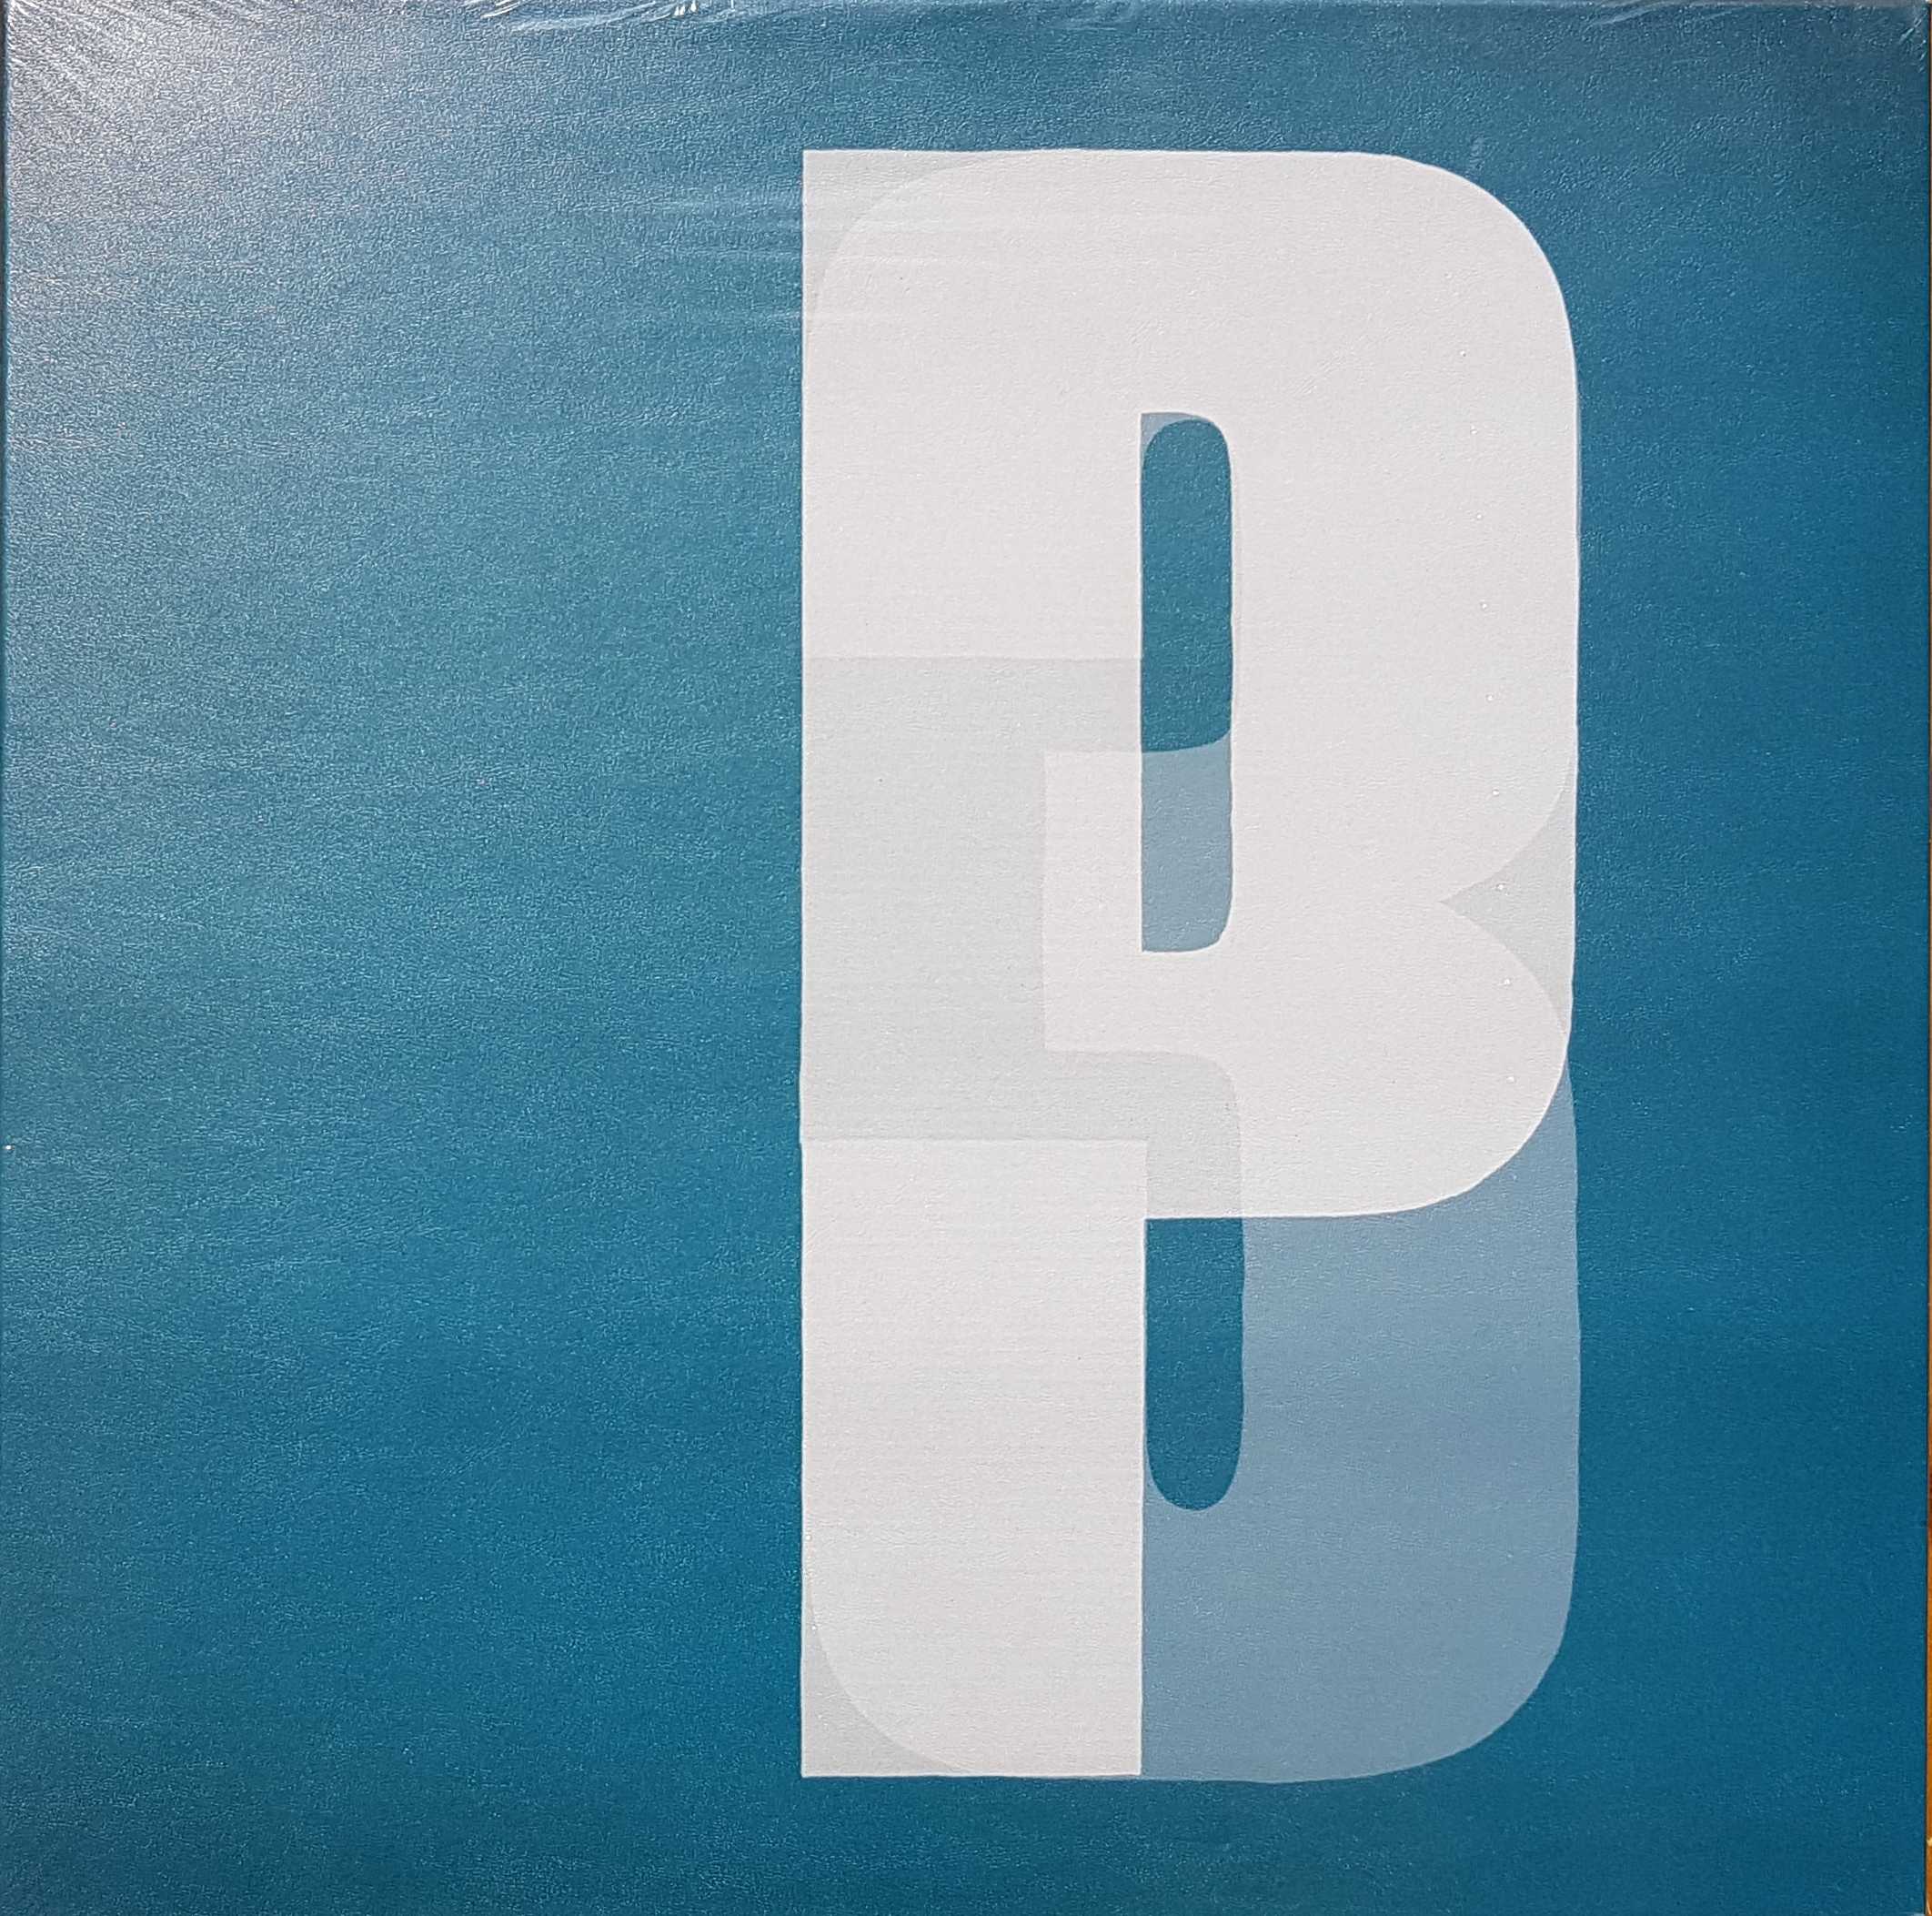 Picture of 1764104 Third album by artist Portishead  